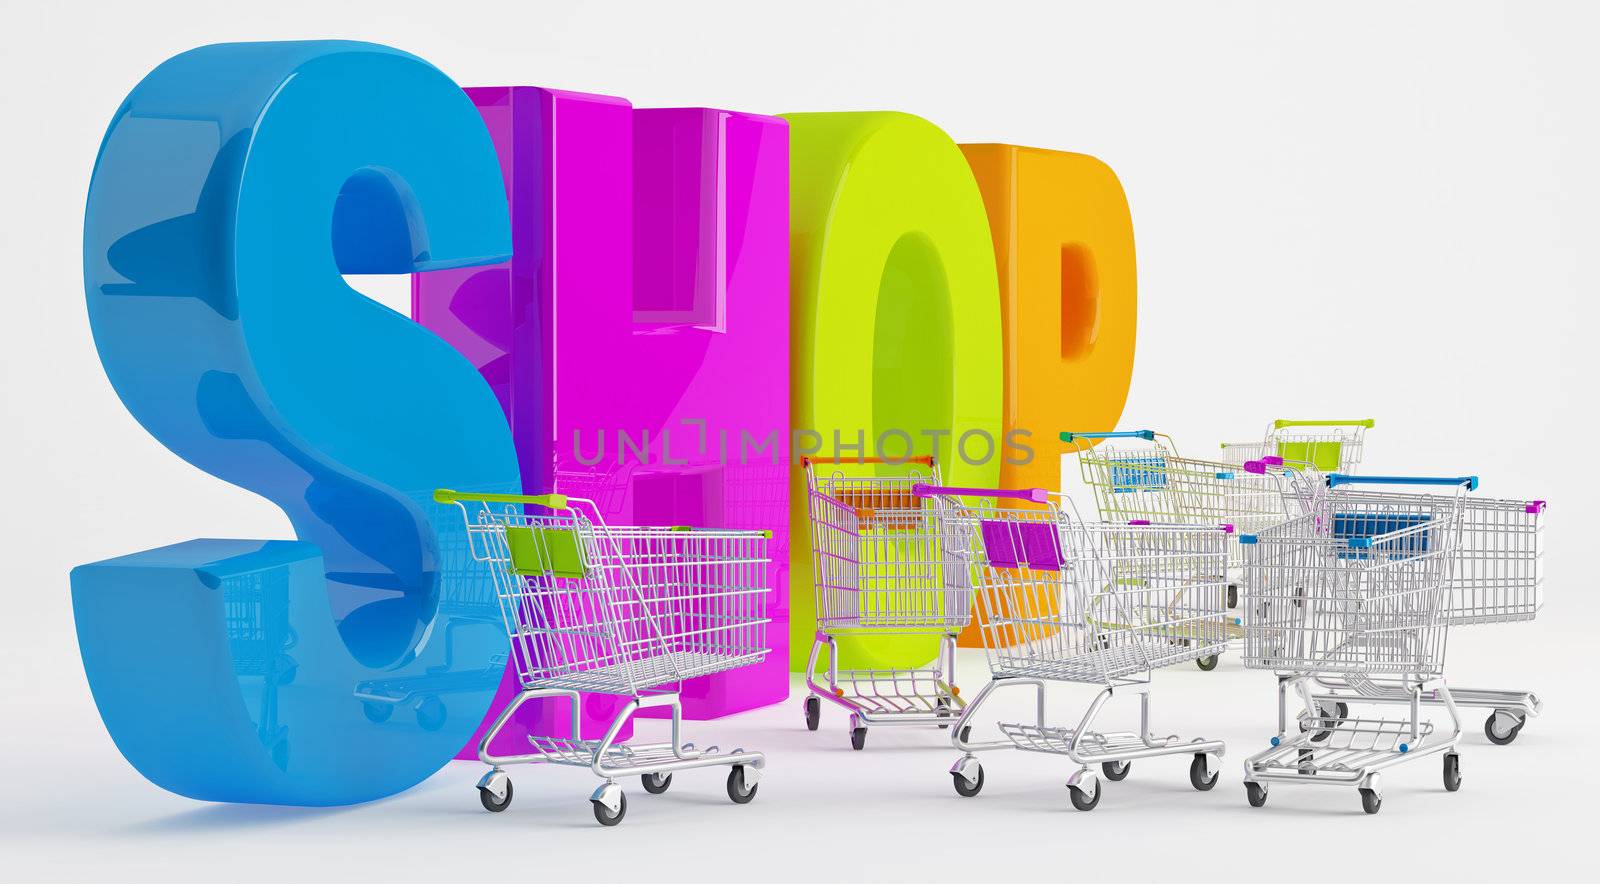 Many shopping carts are near the big letters